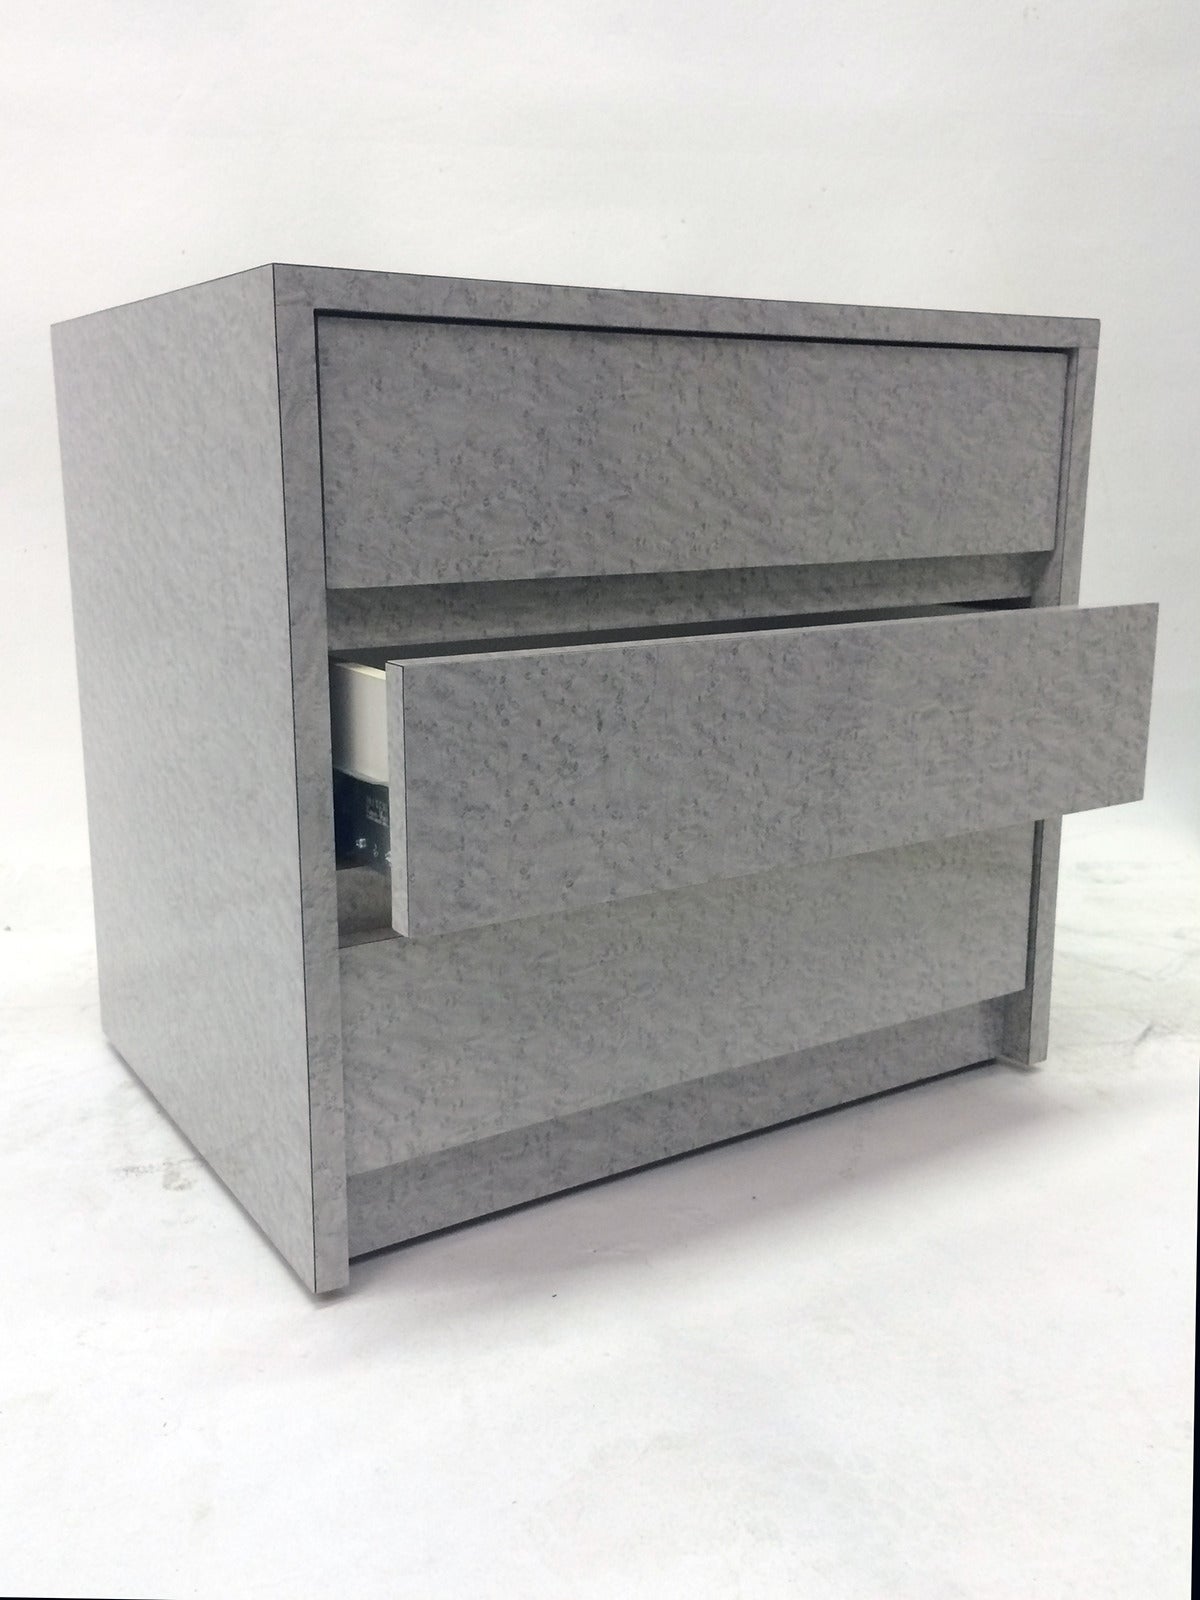 Two matching grey birds eye maple like laminate night stands by Contemporary Mica Inc of Chicago. Three drawers each - white inside.  Give your design project a chic, playful modern feel with these matching 80's pieces.